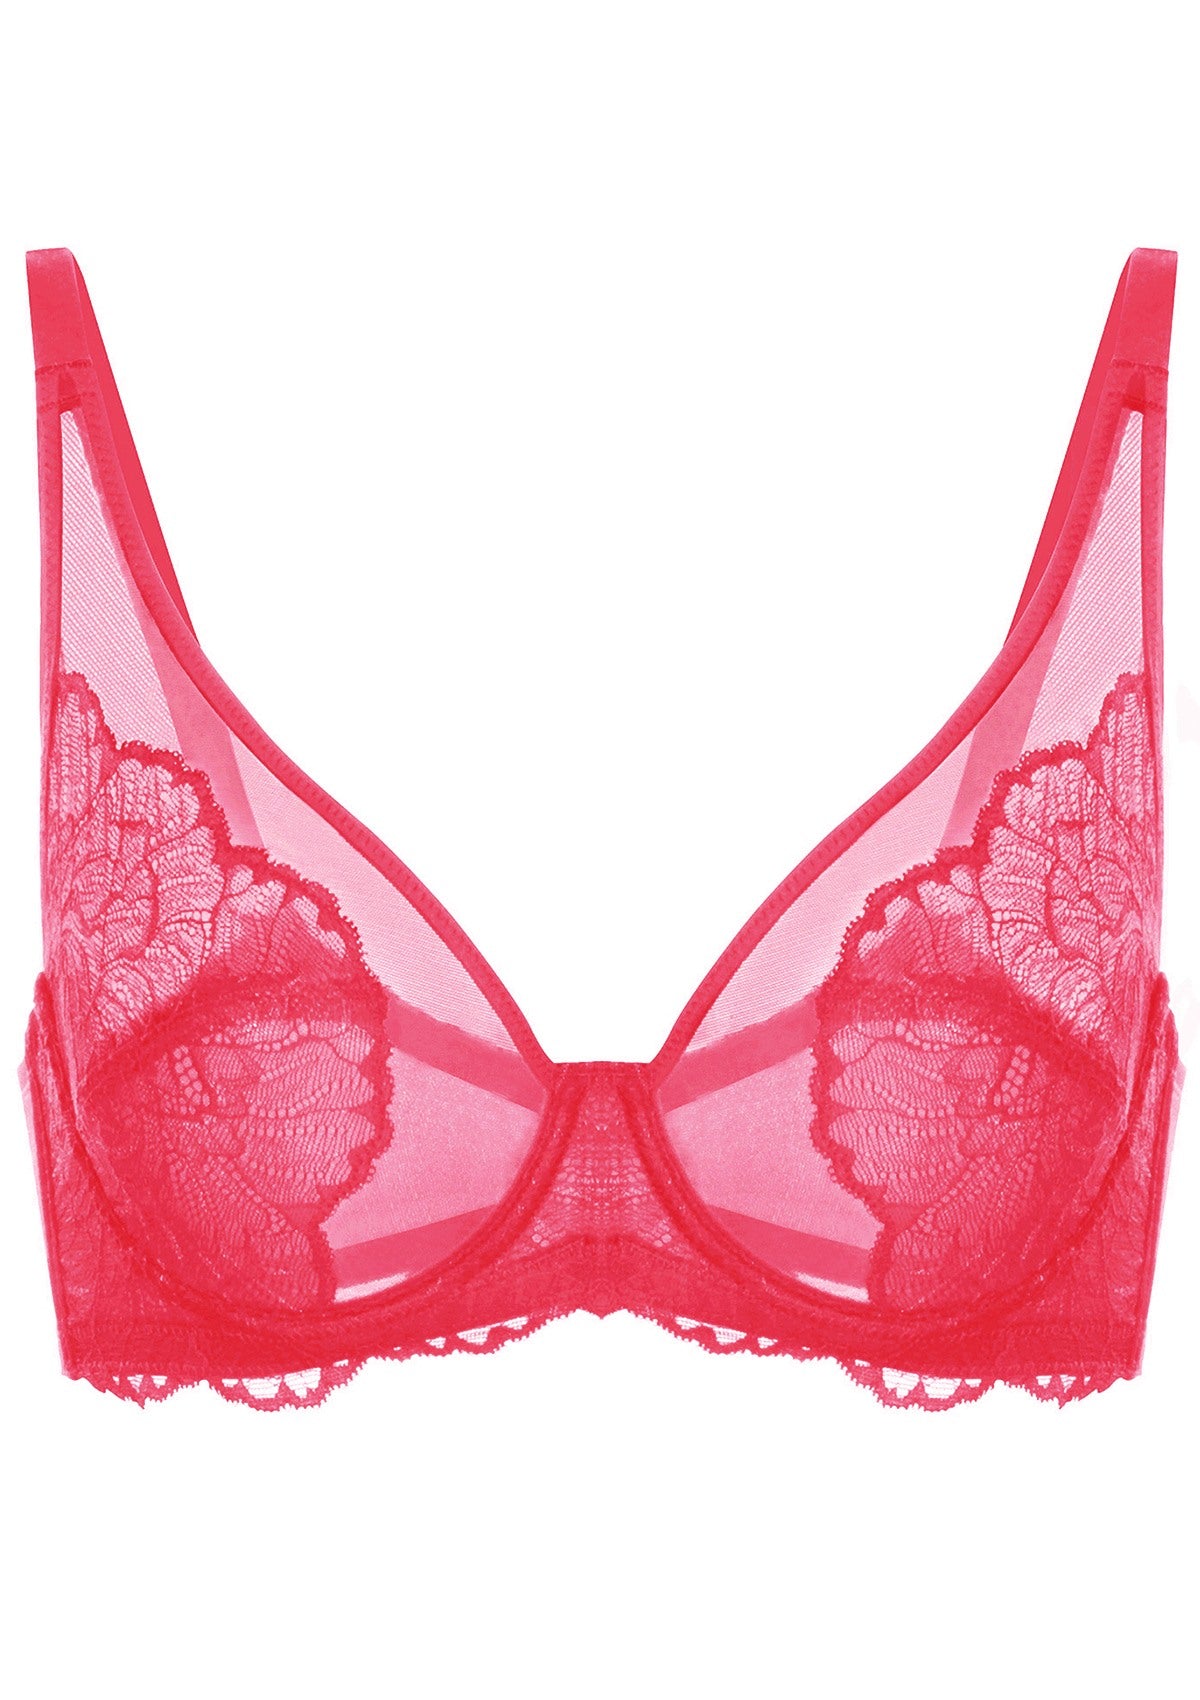 HSIA Blossom Unlined Lace Underwire Bra - Light Coral / 36 / D